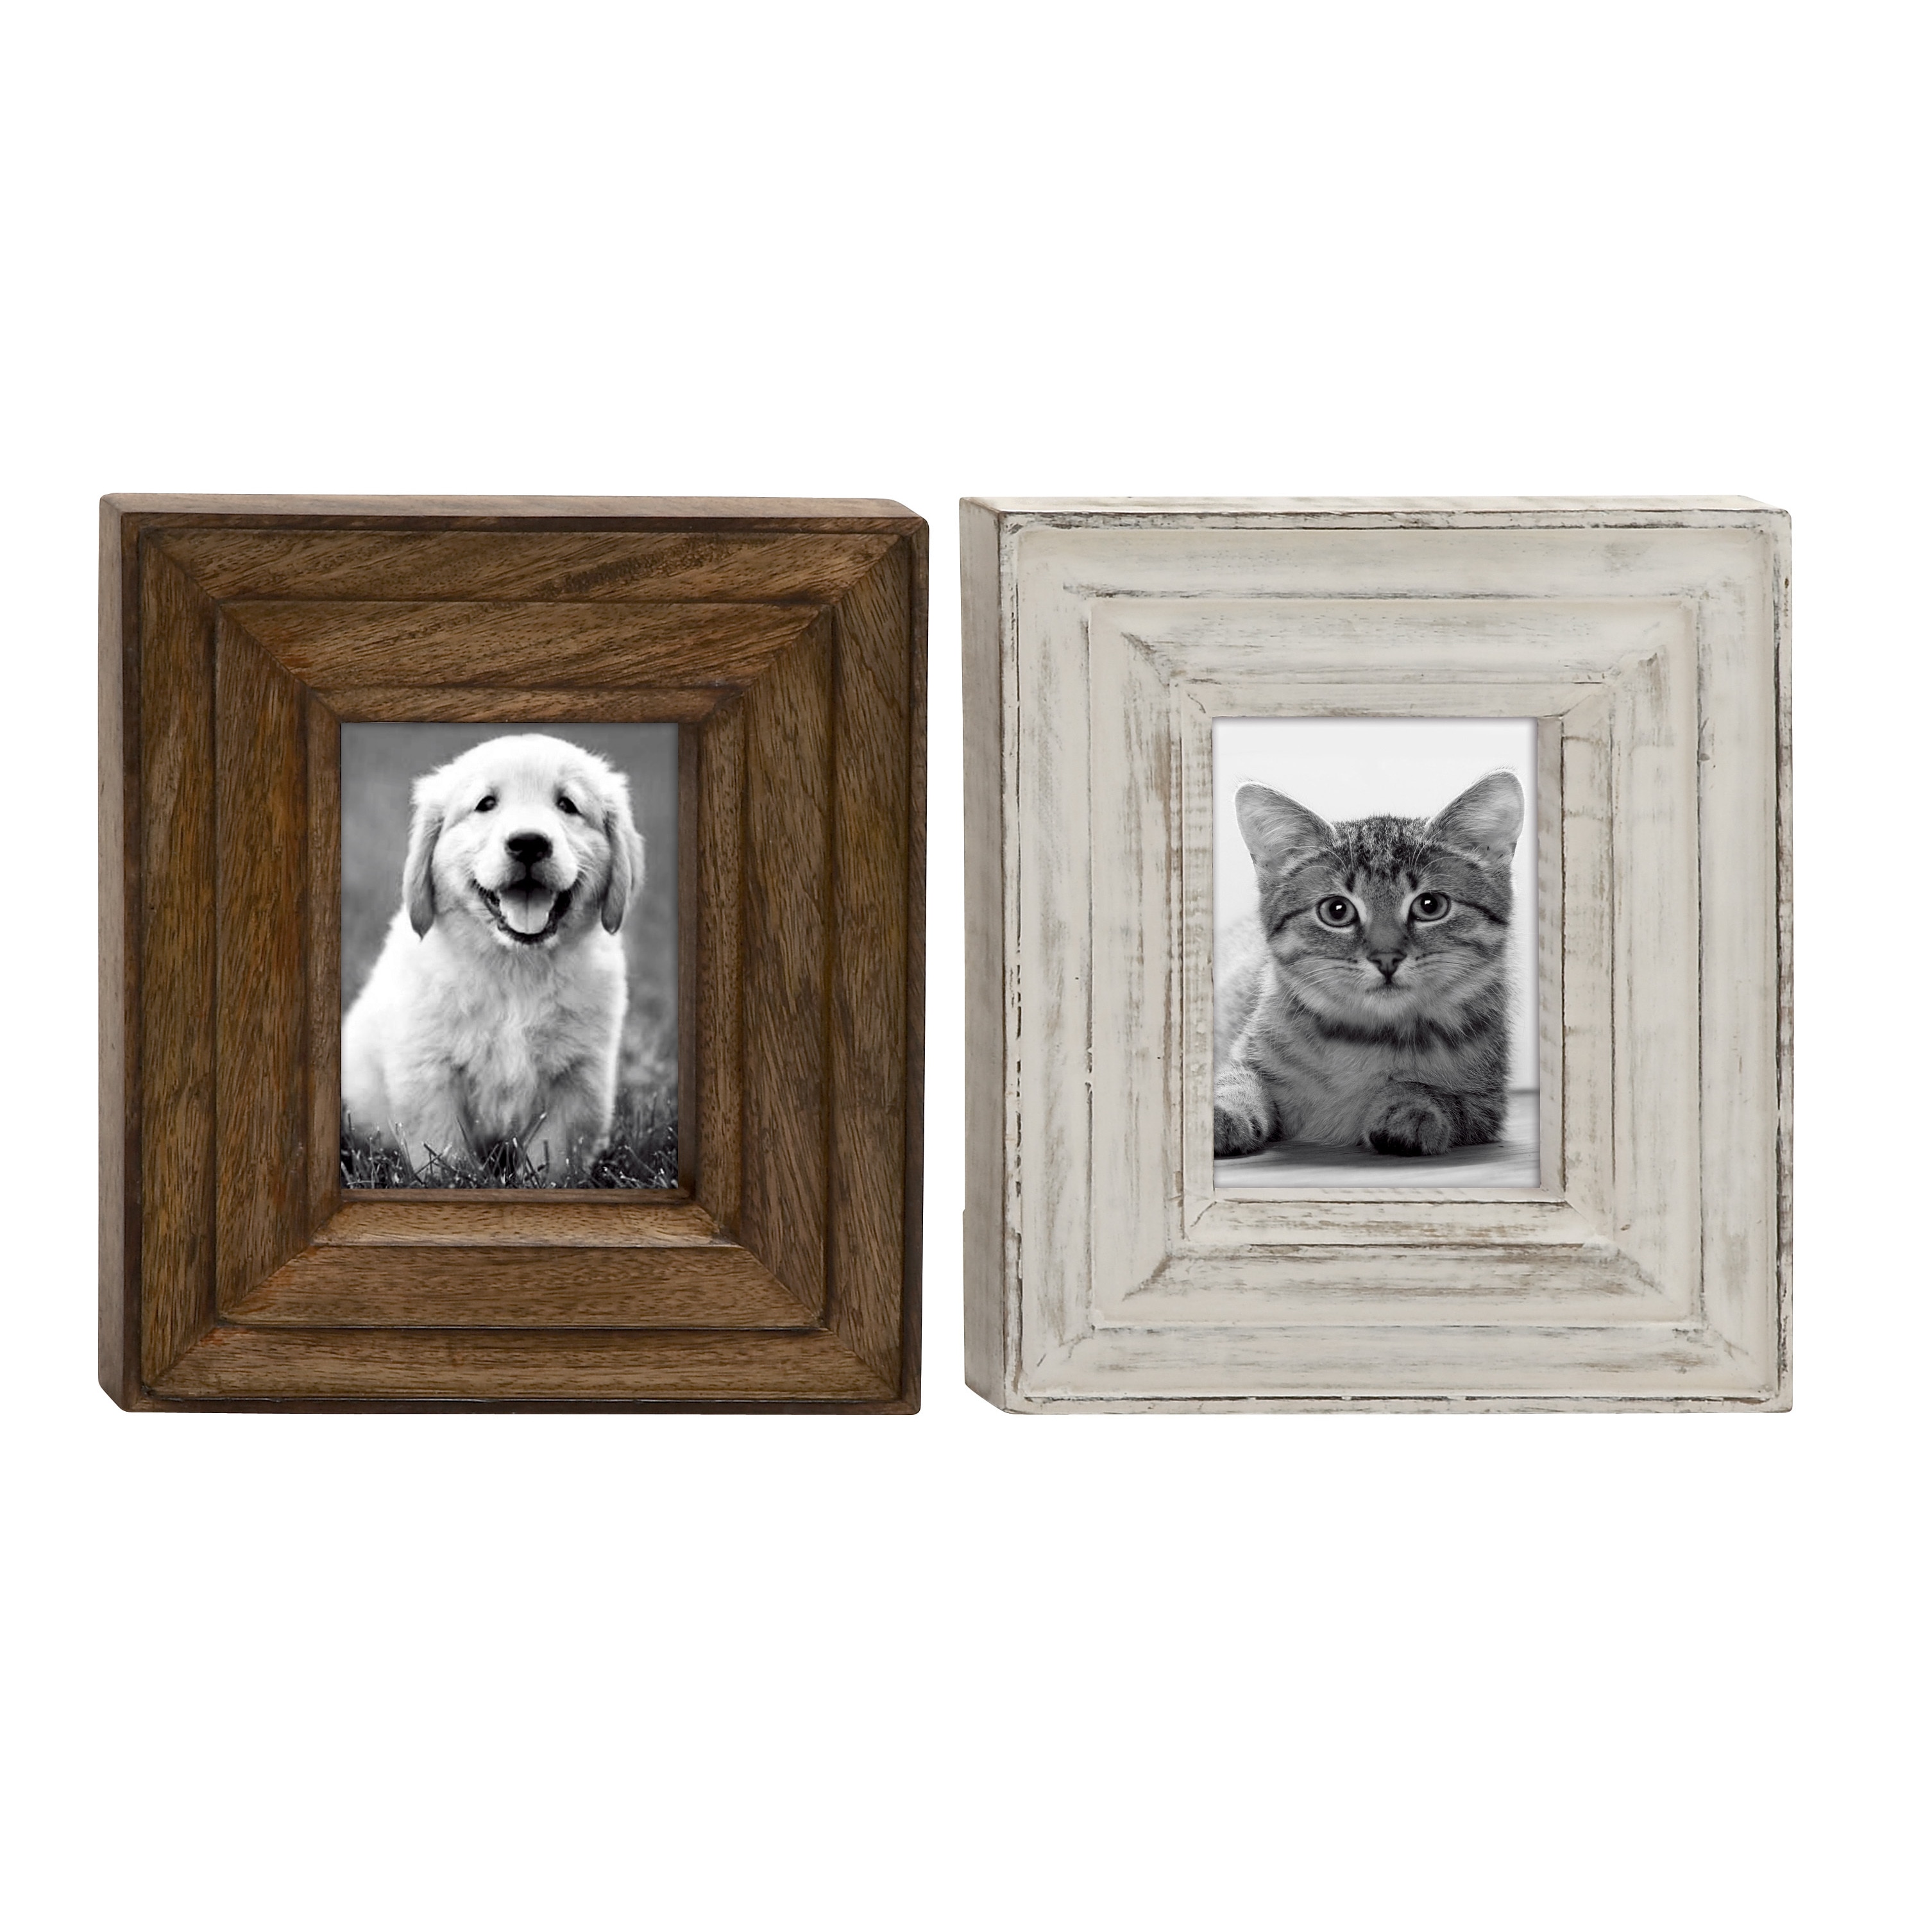 32x42 Natural Picture Frame with 29.5x39.5 Black Mat Opening for 30x40  Image, 0.75 Inch Border, UV